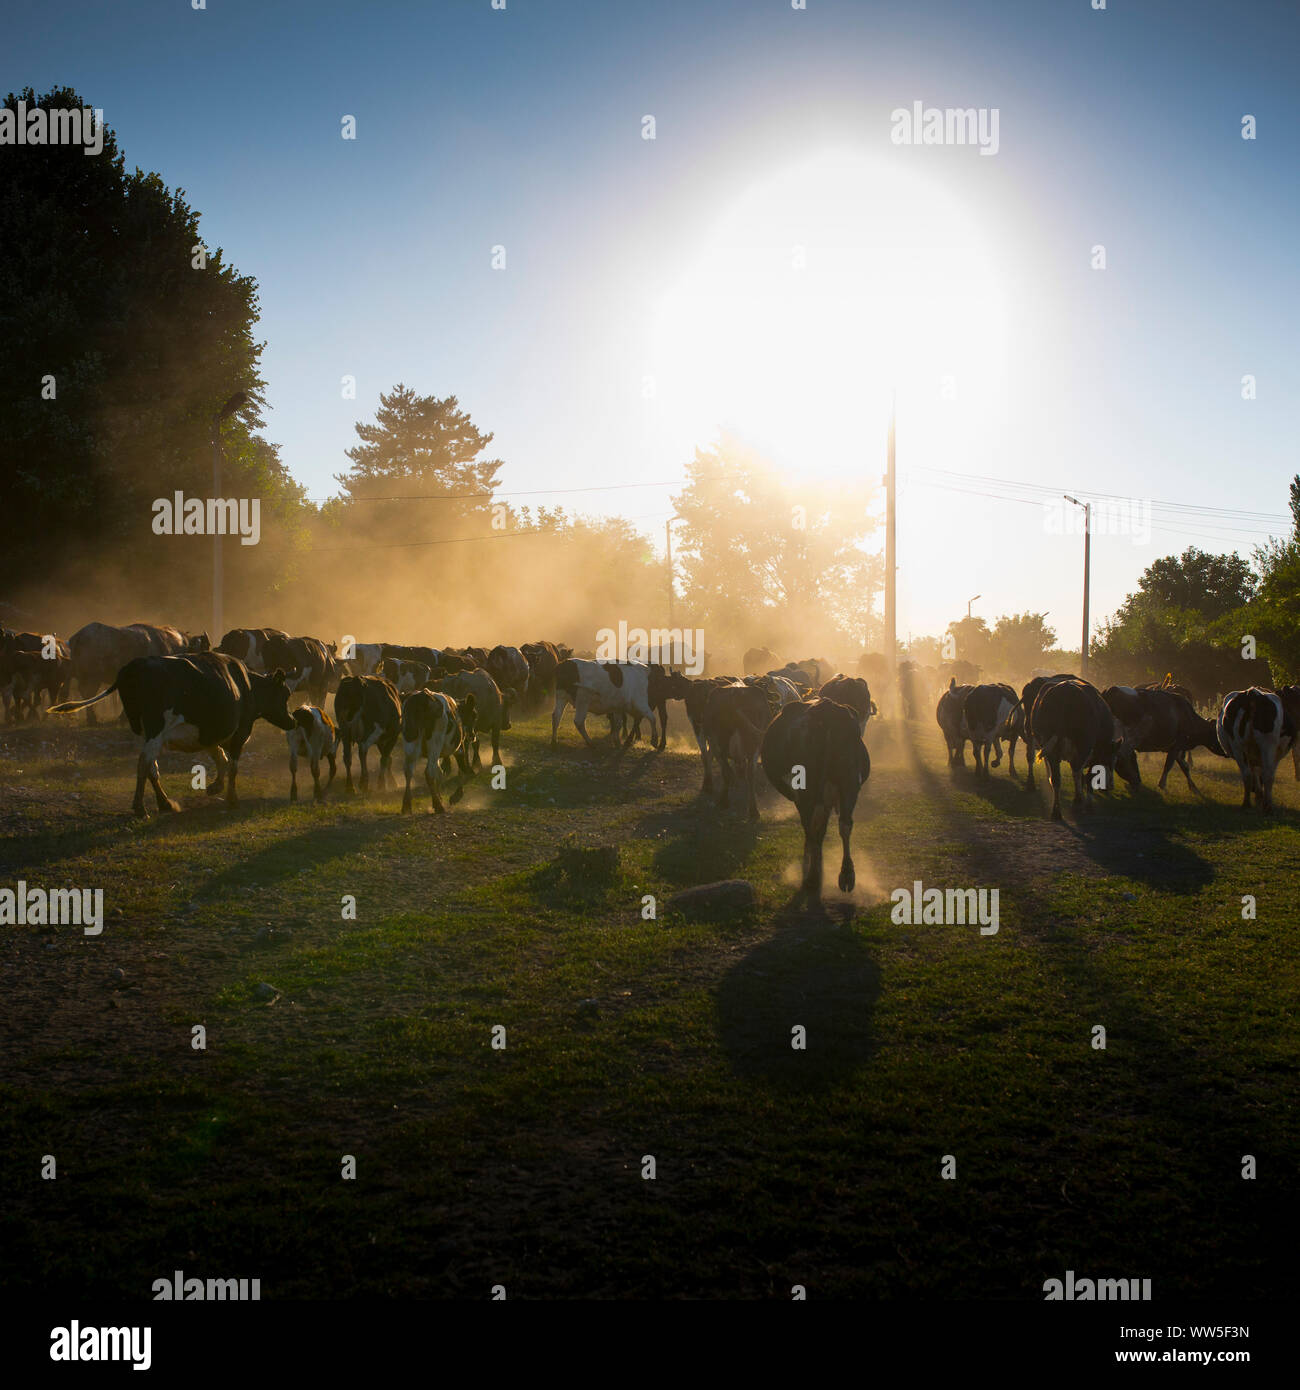 Cow herd in backlight with dusty soil Stock Photo